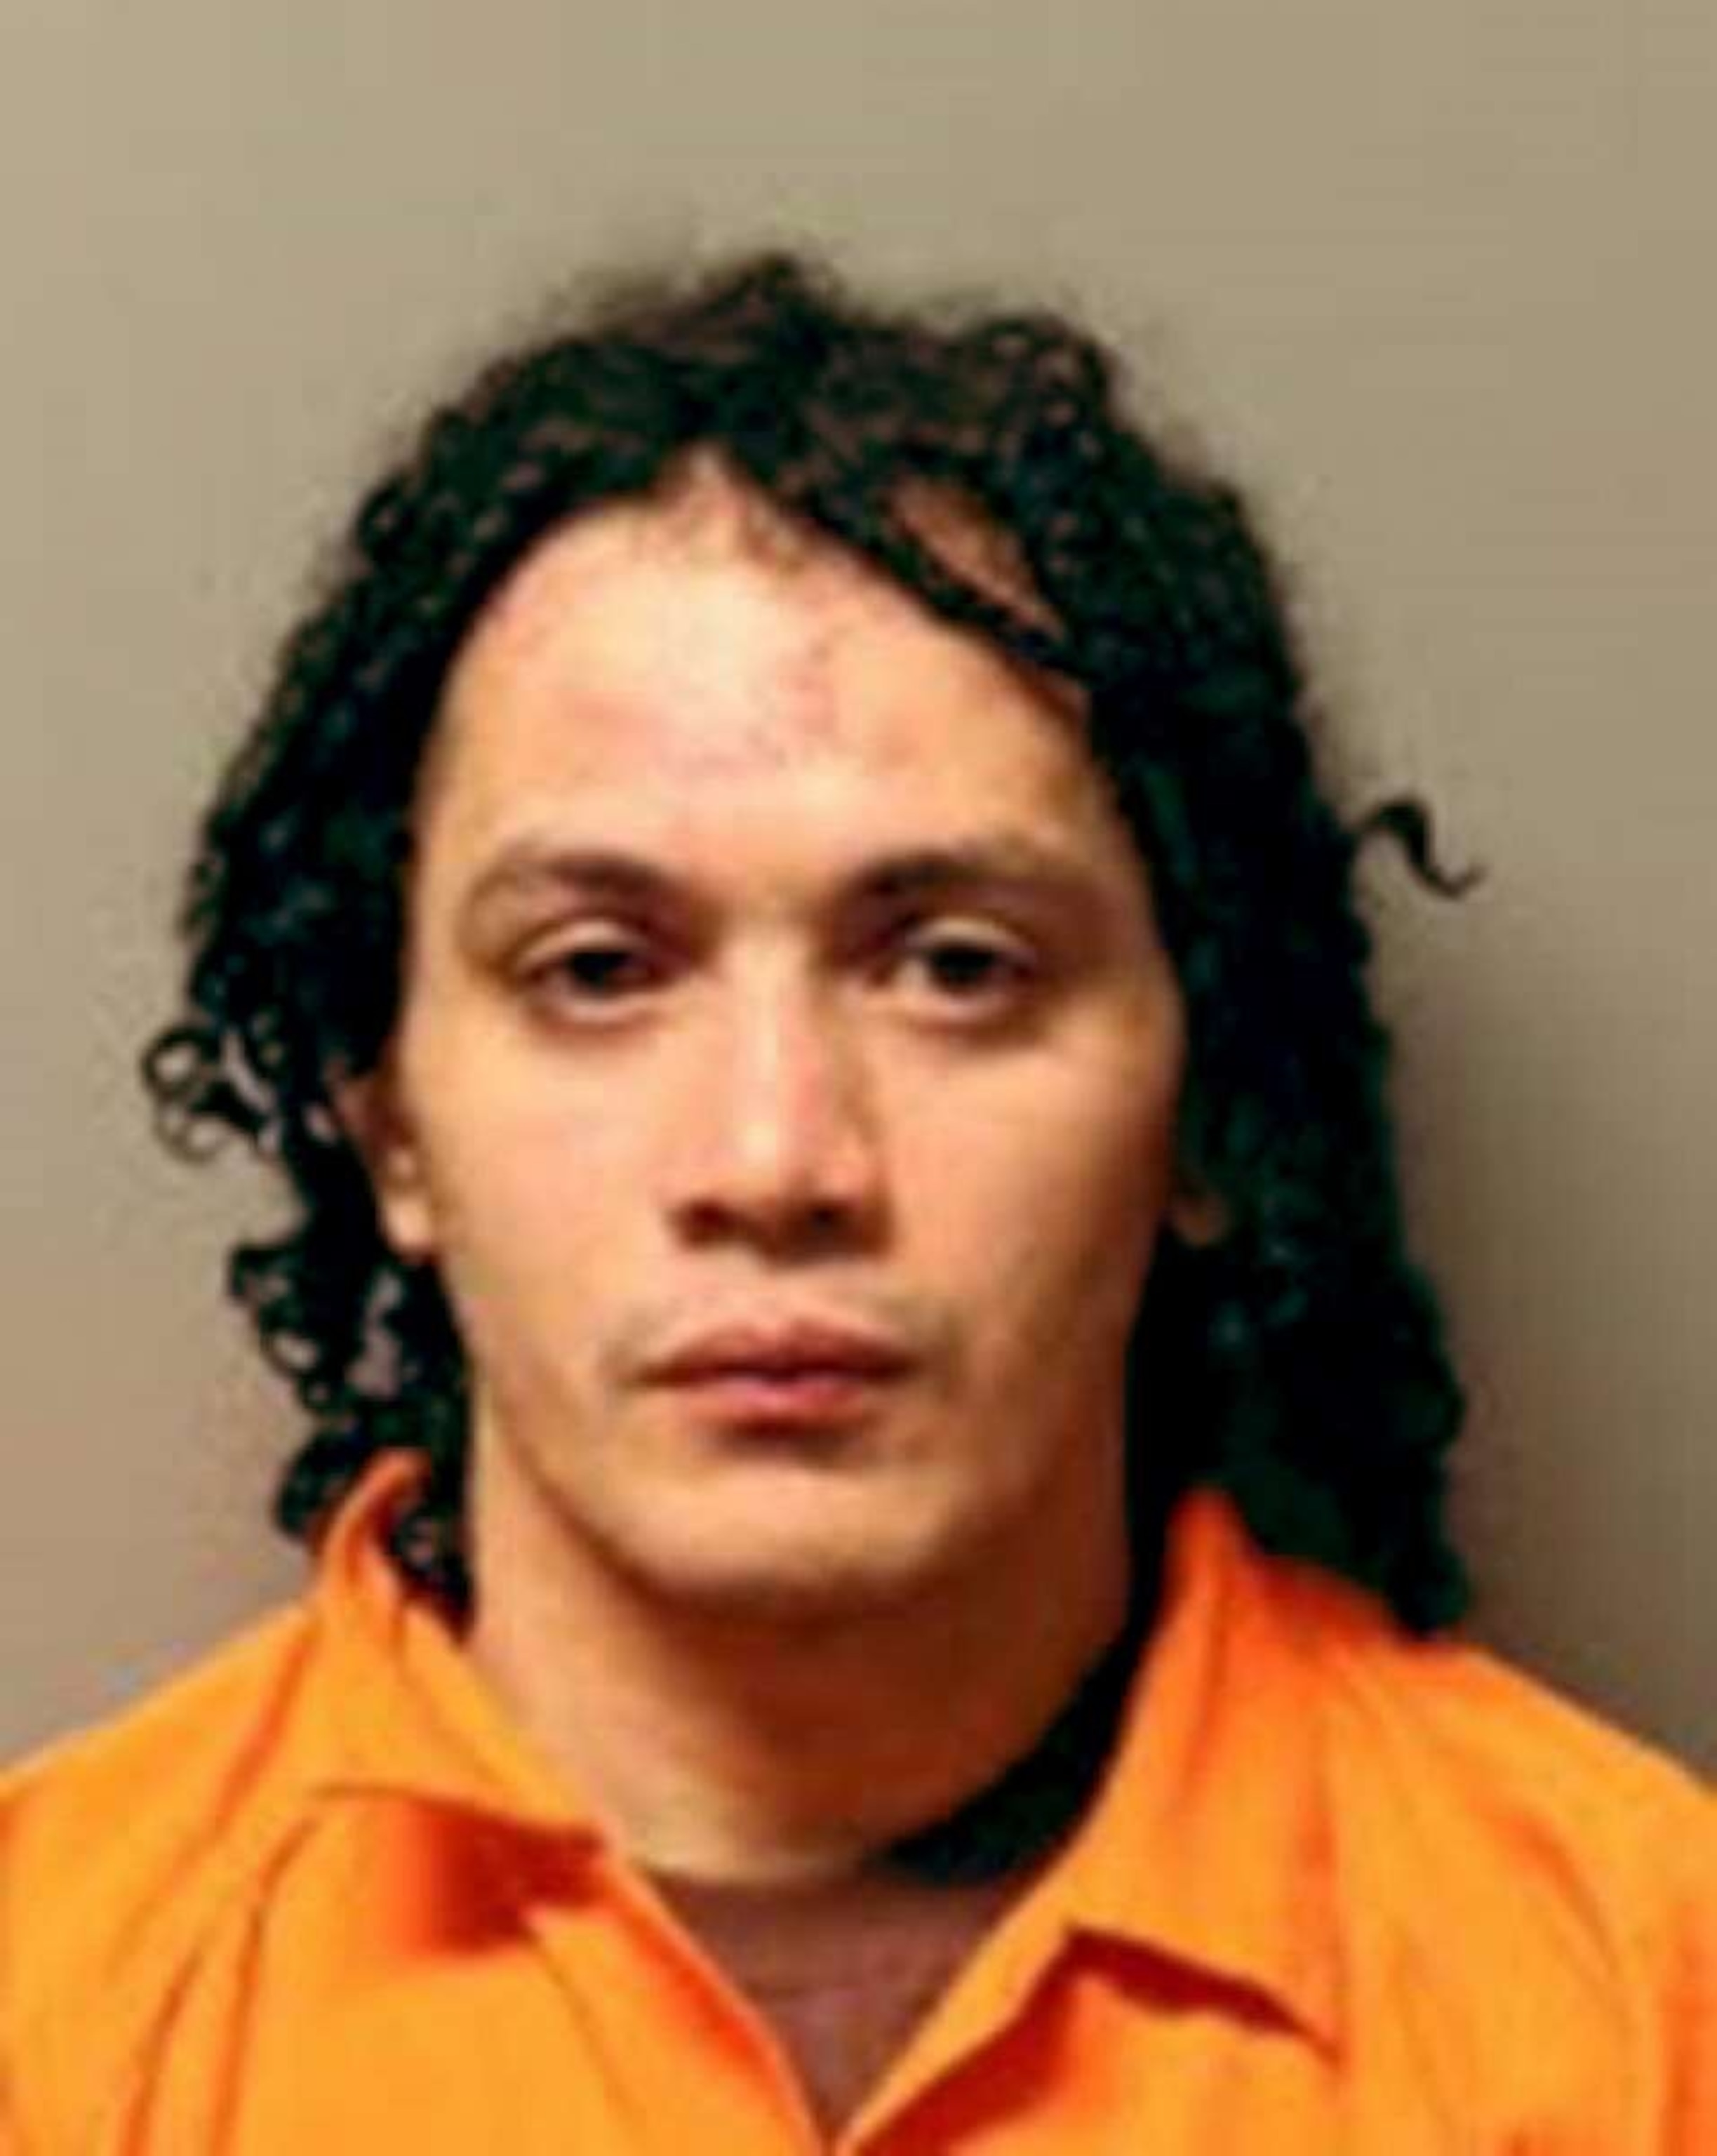 PHOTO: Danelo Cavalcante in a photo released by the Pennsylvania Department of Corrections.